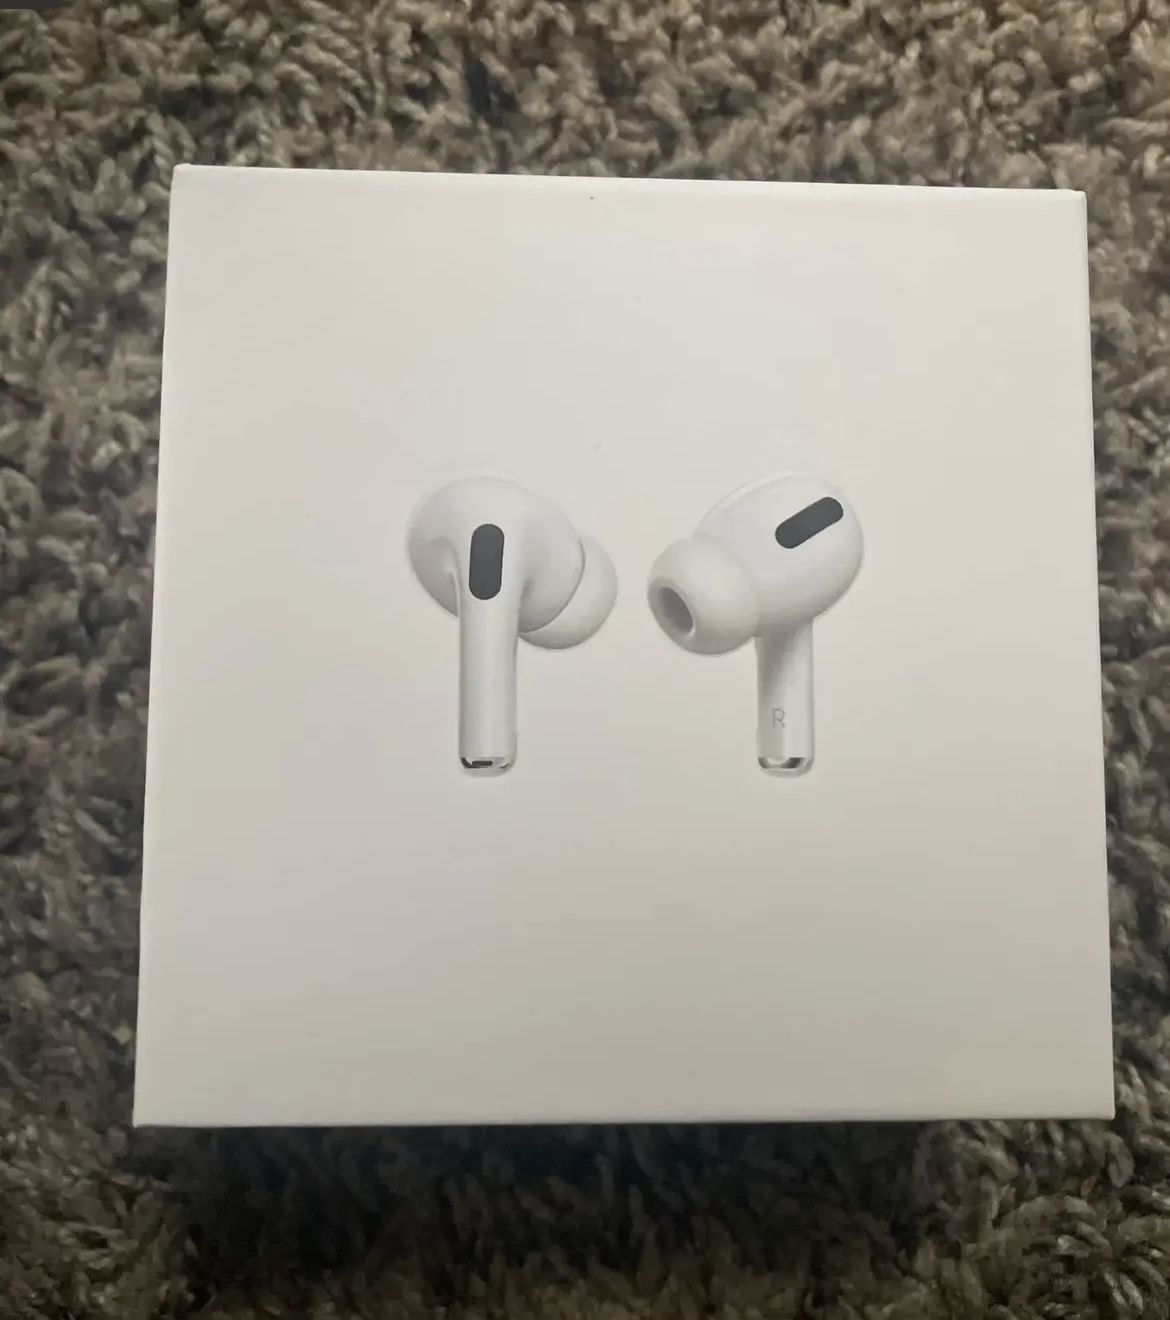 Airpods Pros with Box and Fast Charger